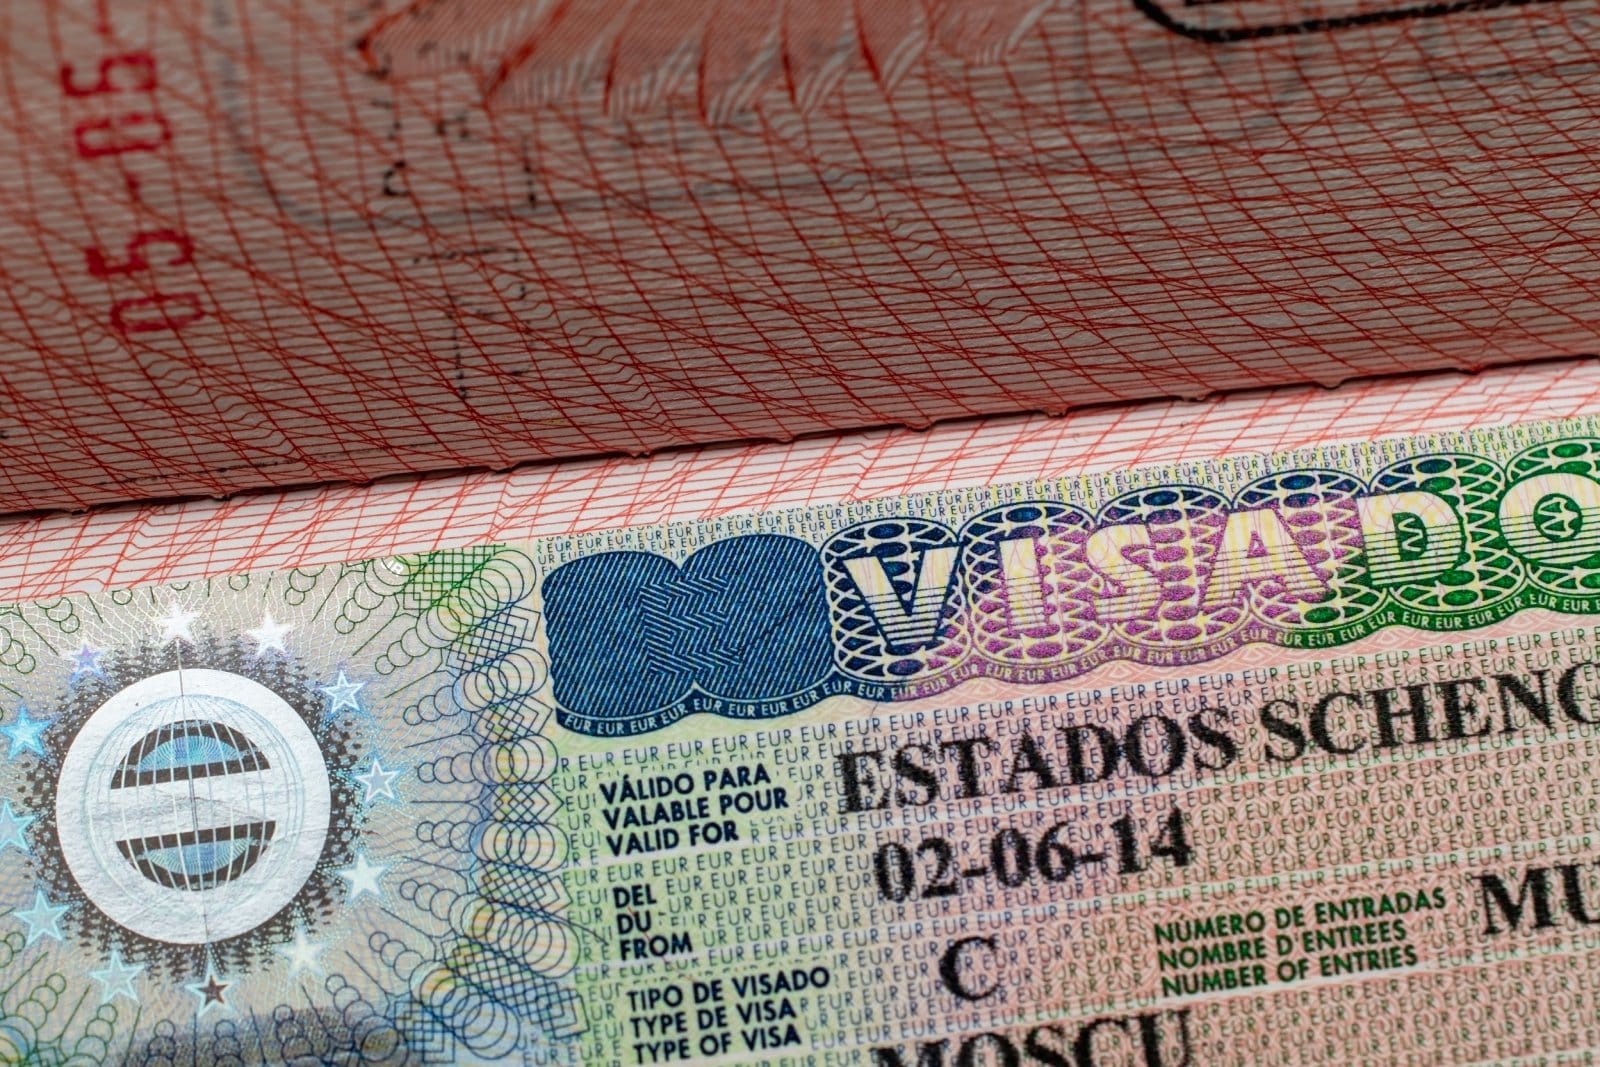 <p><span>While the criteria for the famous Portugal Golden Visa have become a lot stricter, two-year temporary residence permits and digital nomad visa programs are still available for U.S. citizens who want to work, study, conduct research, or stay with family in the country.</span></p>